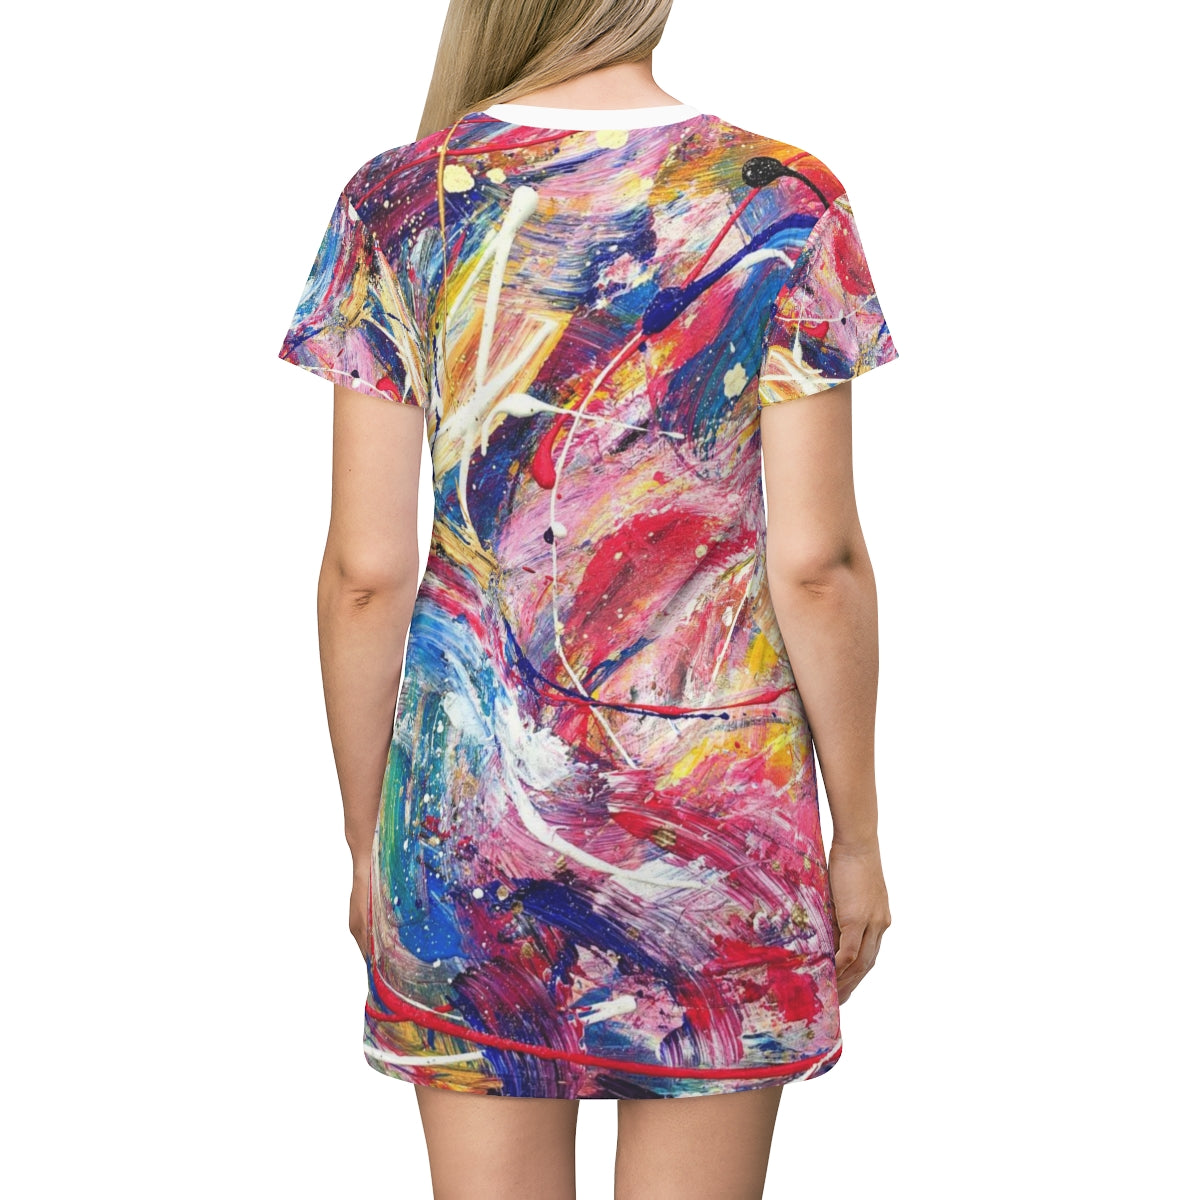 "Free to Move & Change" All Over Print T-Shirt Dress